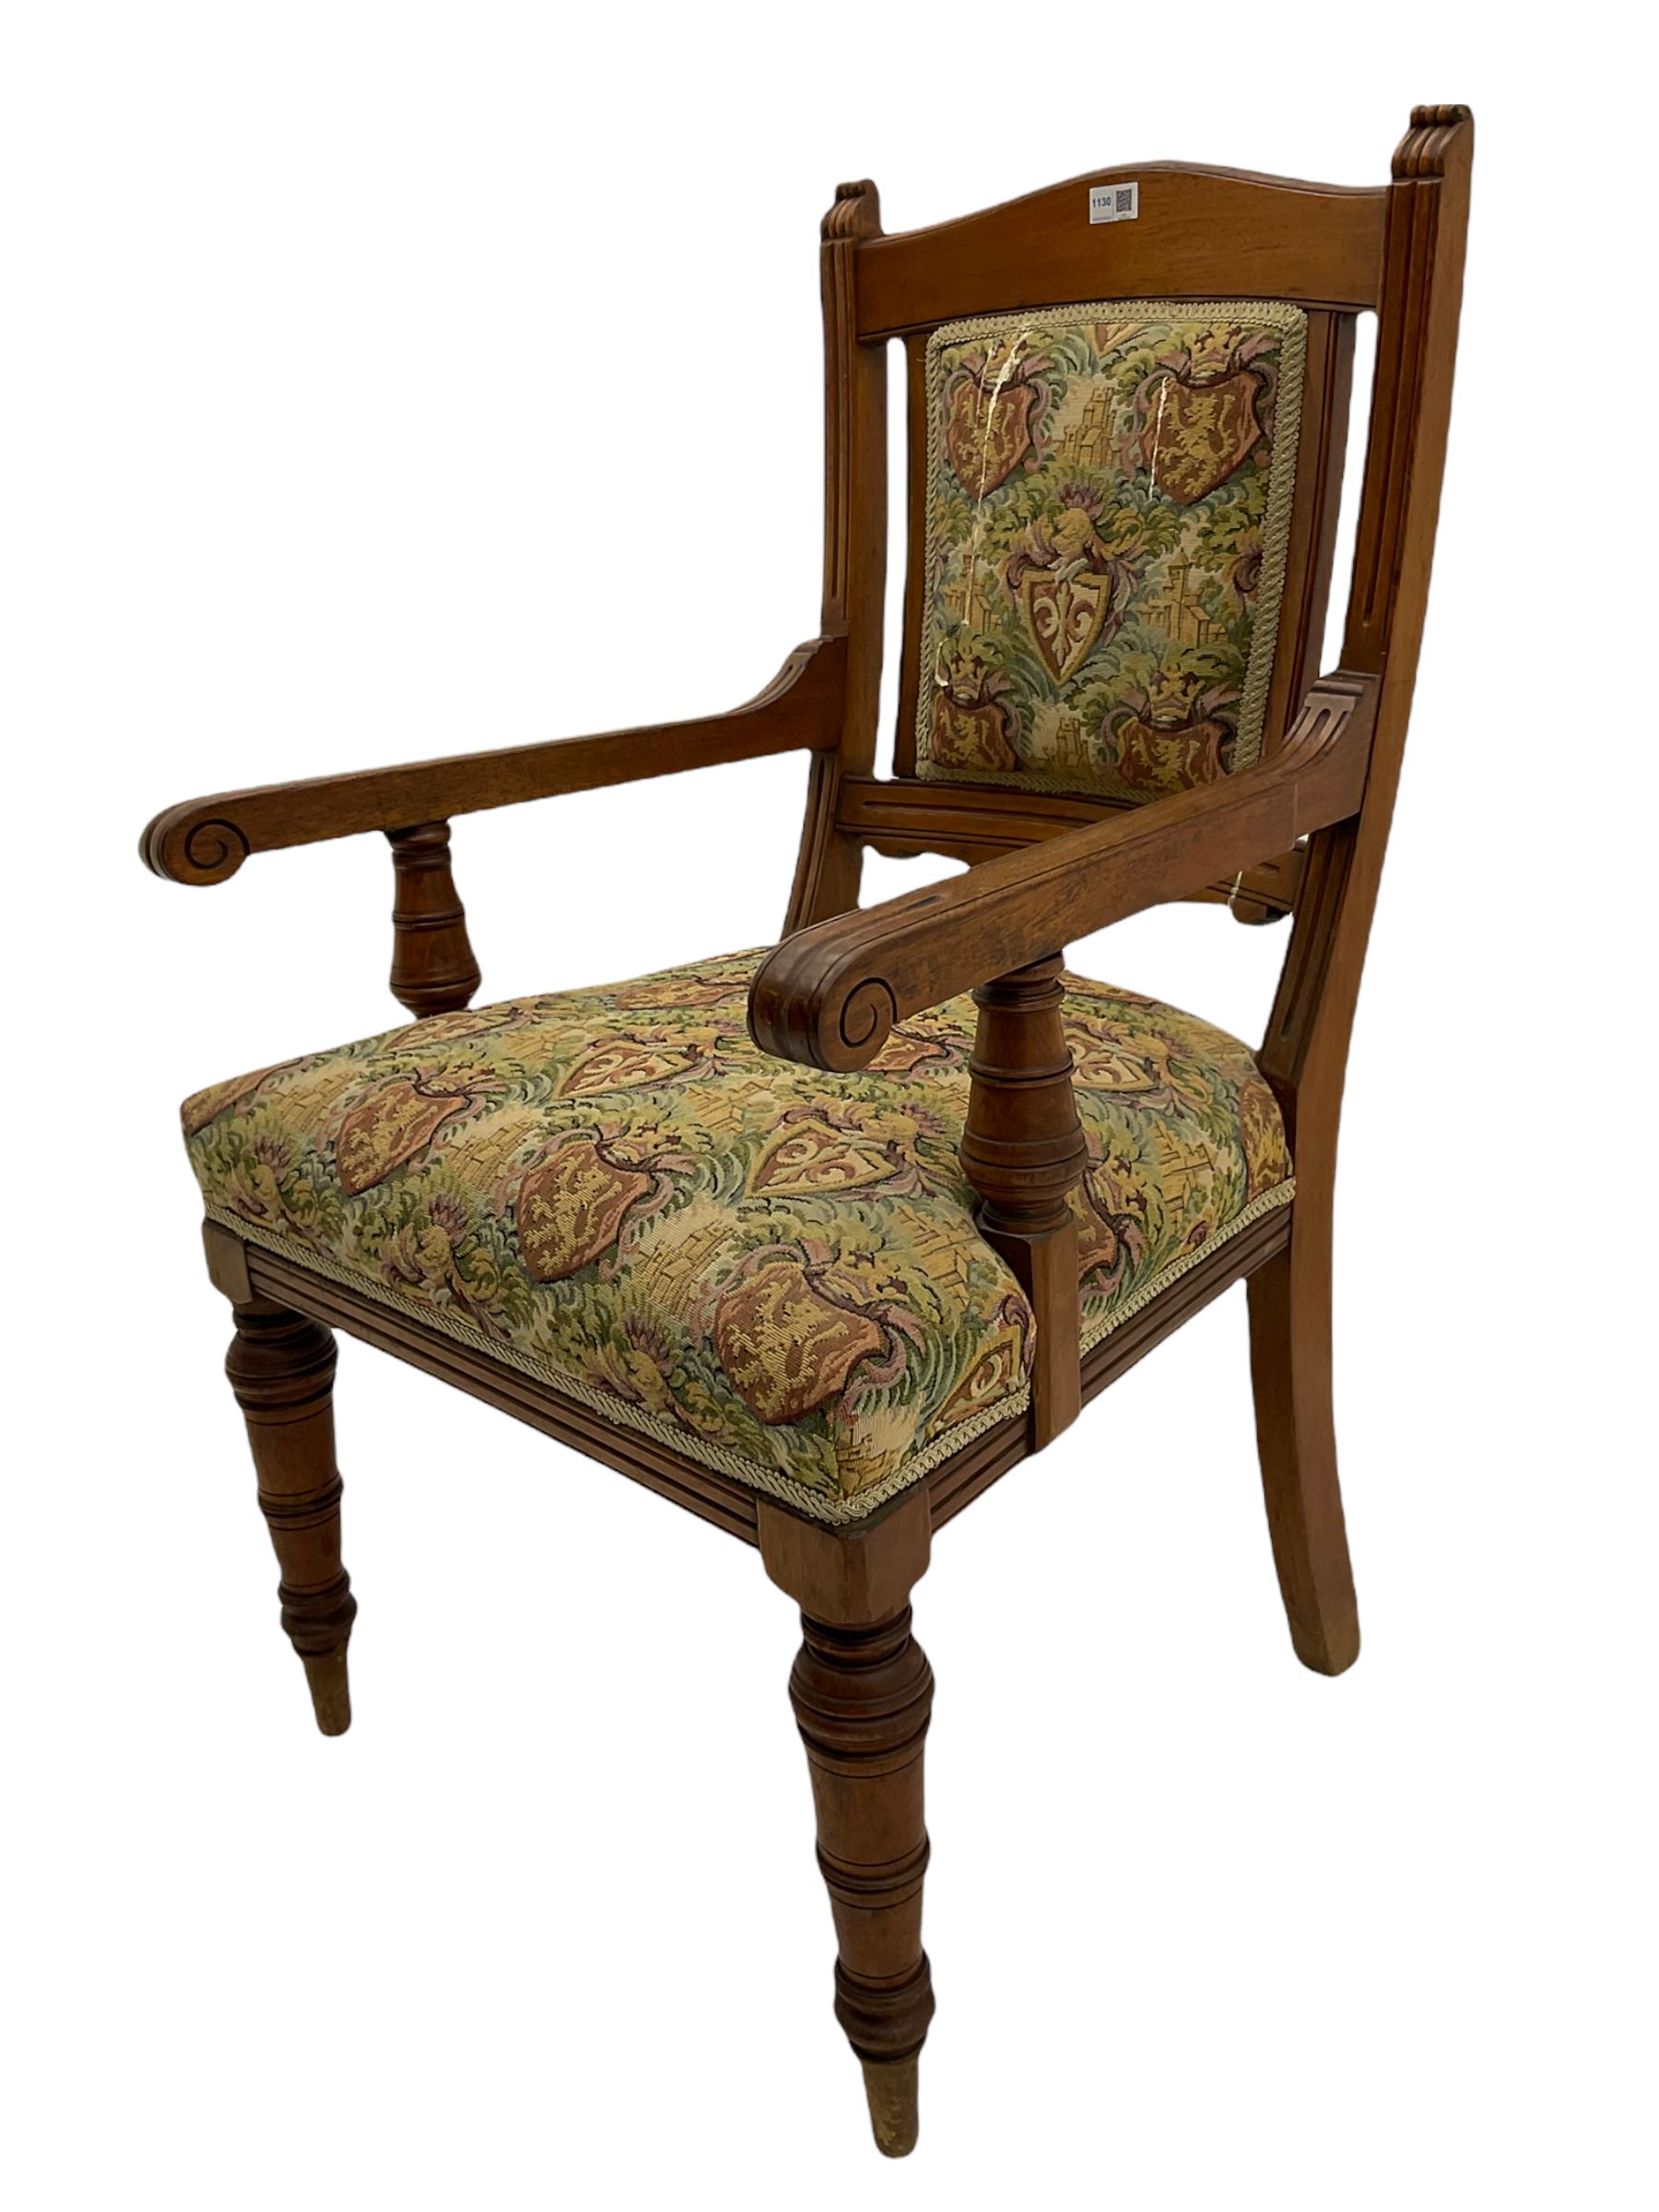 Late Victorian walnut elbow armchair - Image 4 of 6